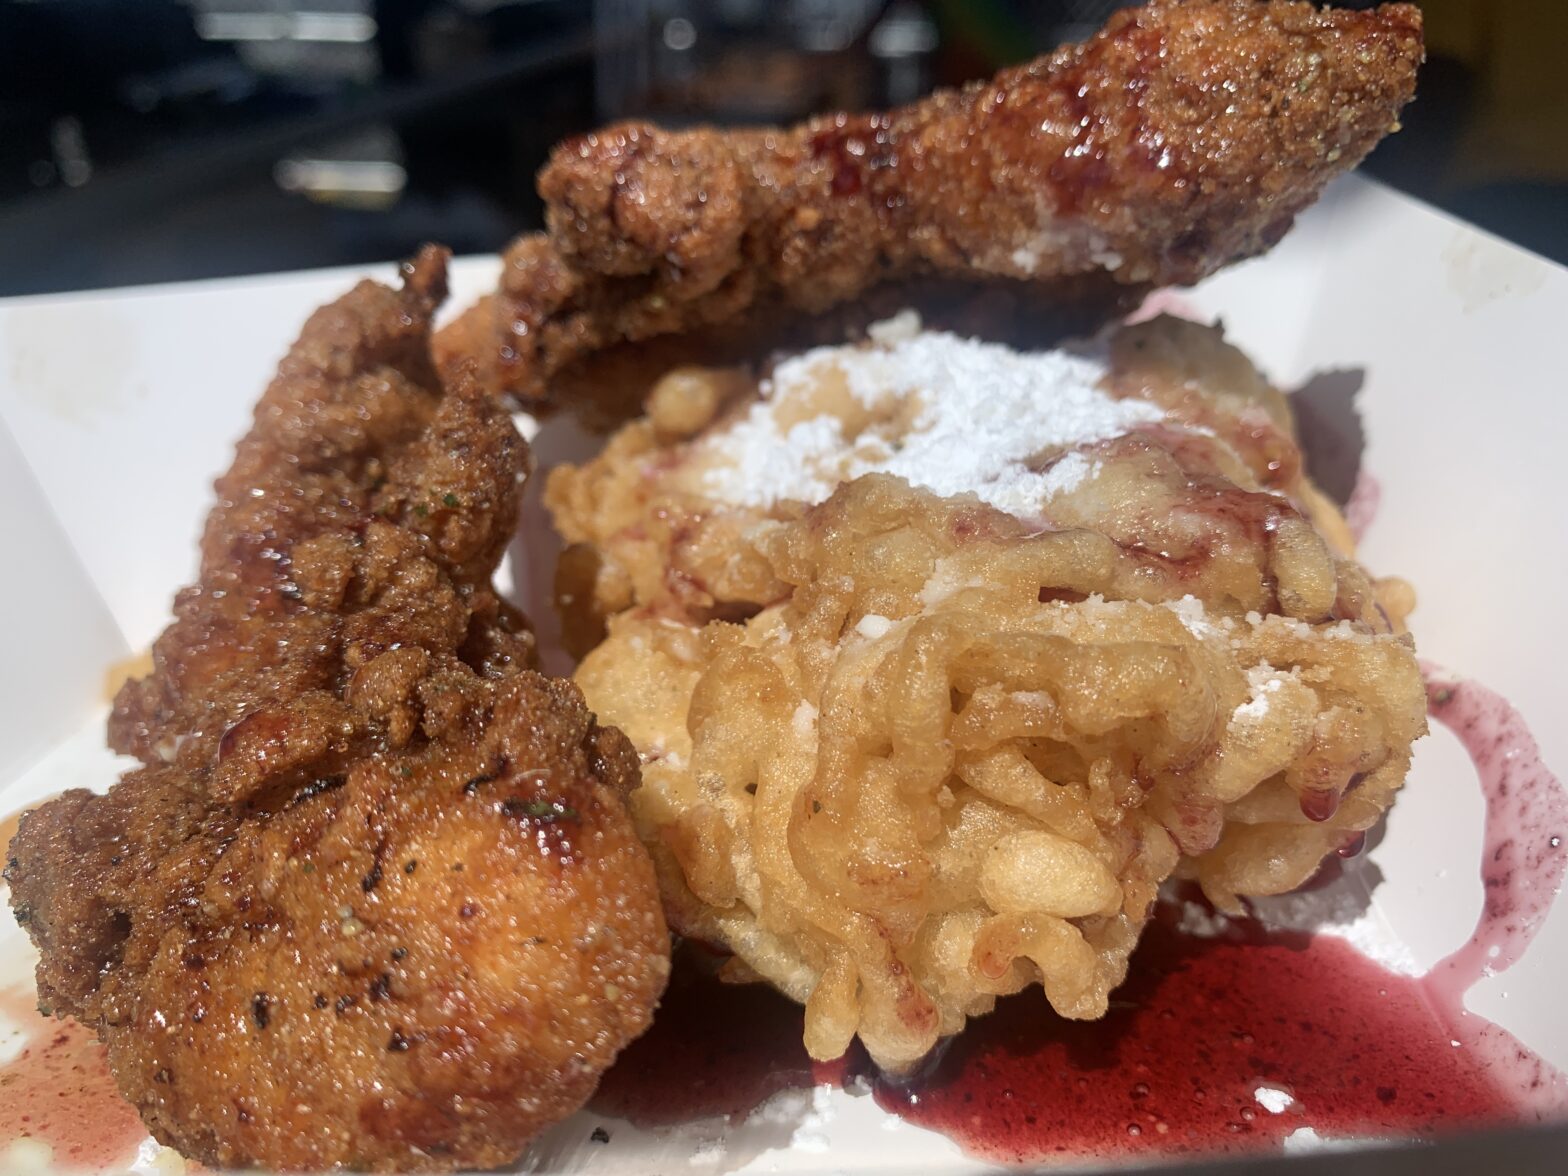 Fried Chicken Festival Highlights New Orleans' Diverse Culinary Culture